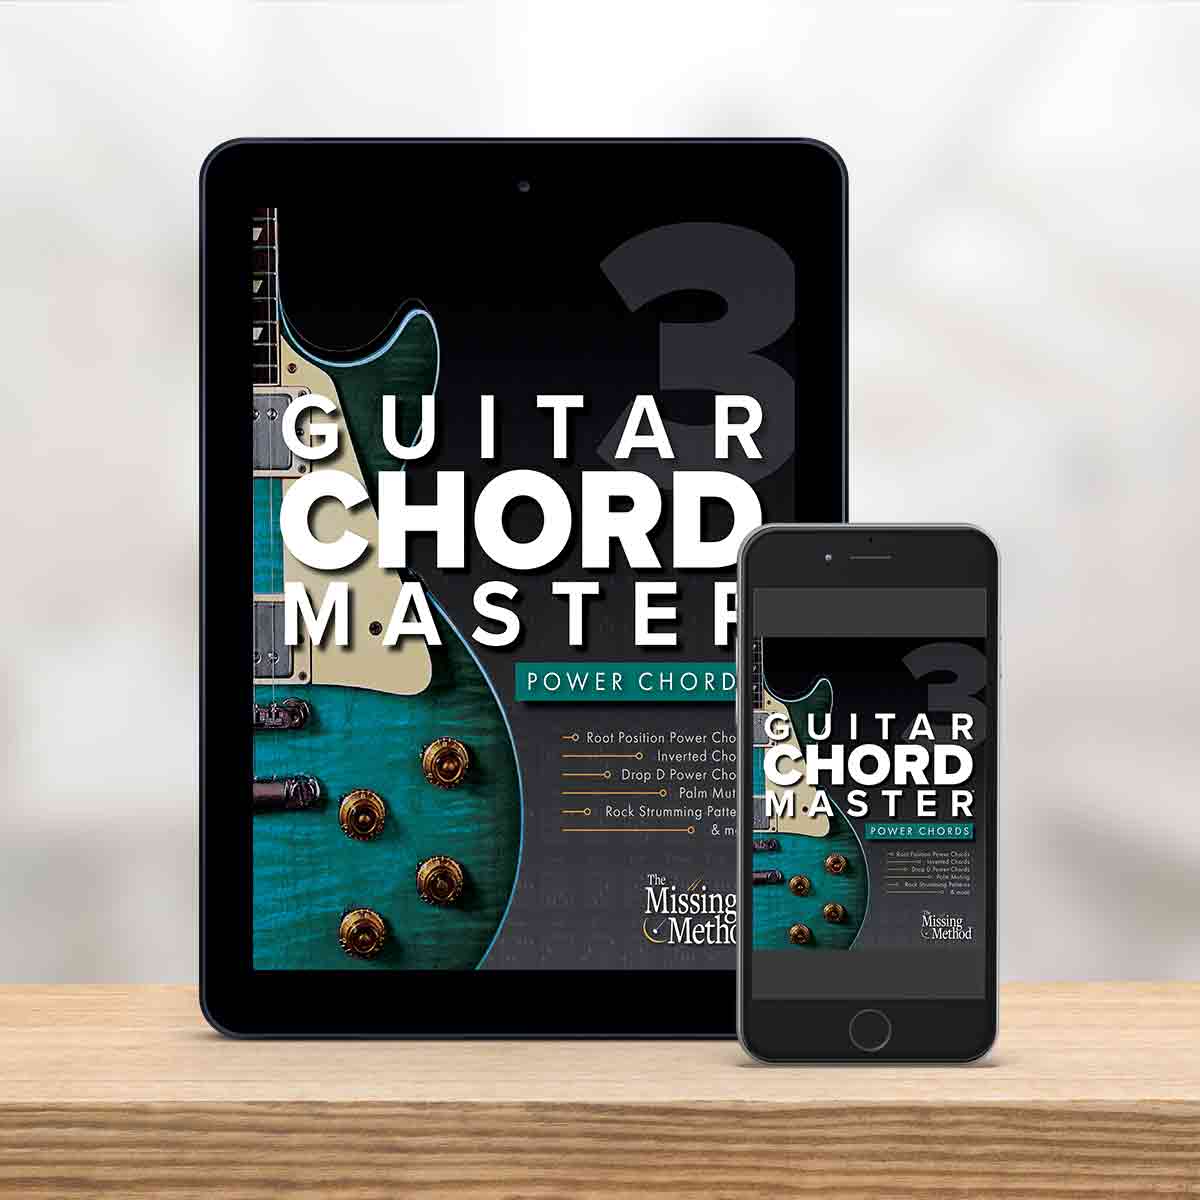 Digital Tablet and smartphone showing the cover of Guitar Chord Master Book 3 by Christian Triola